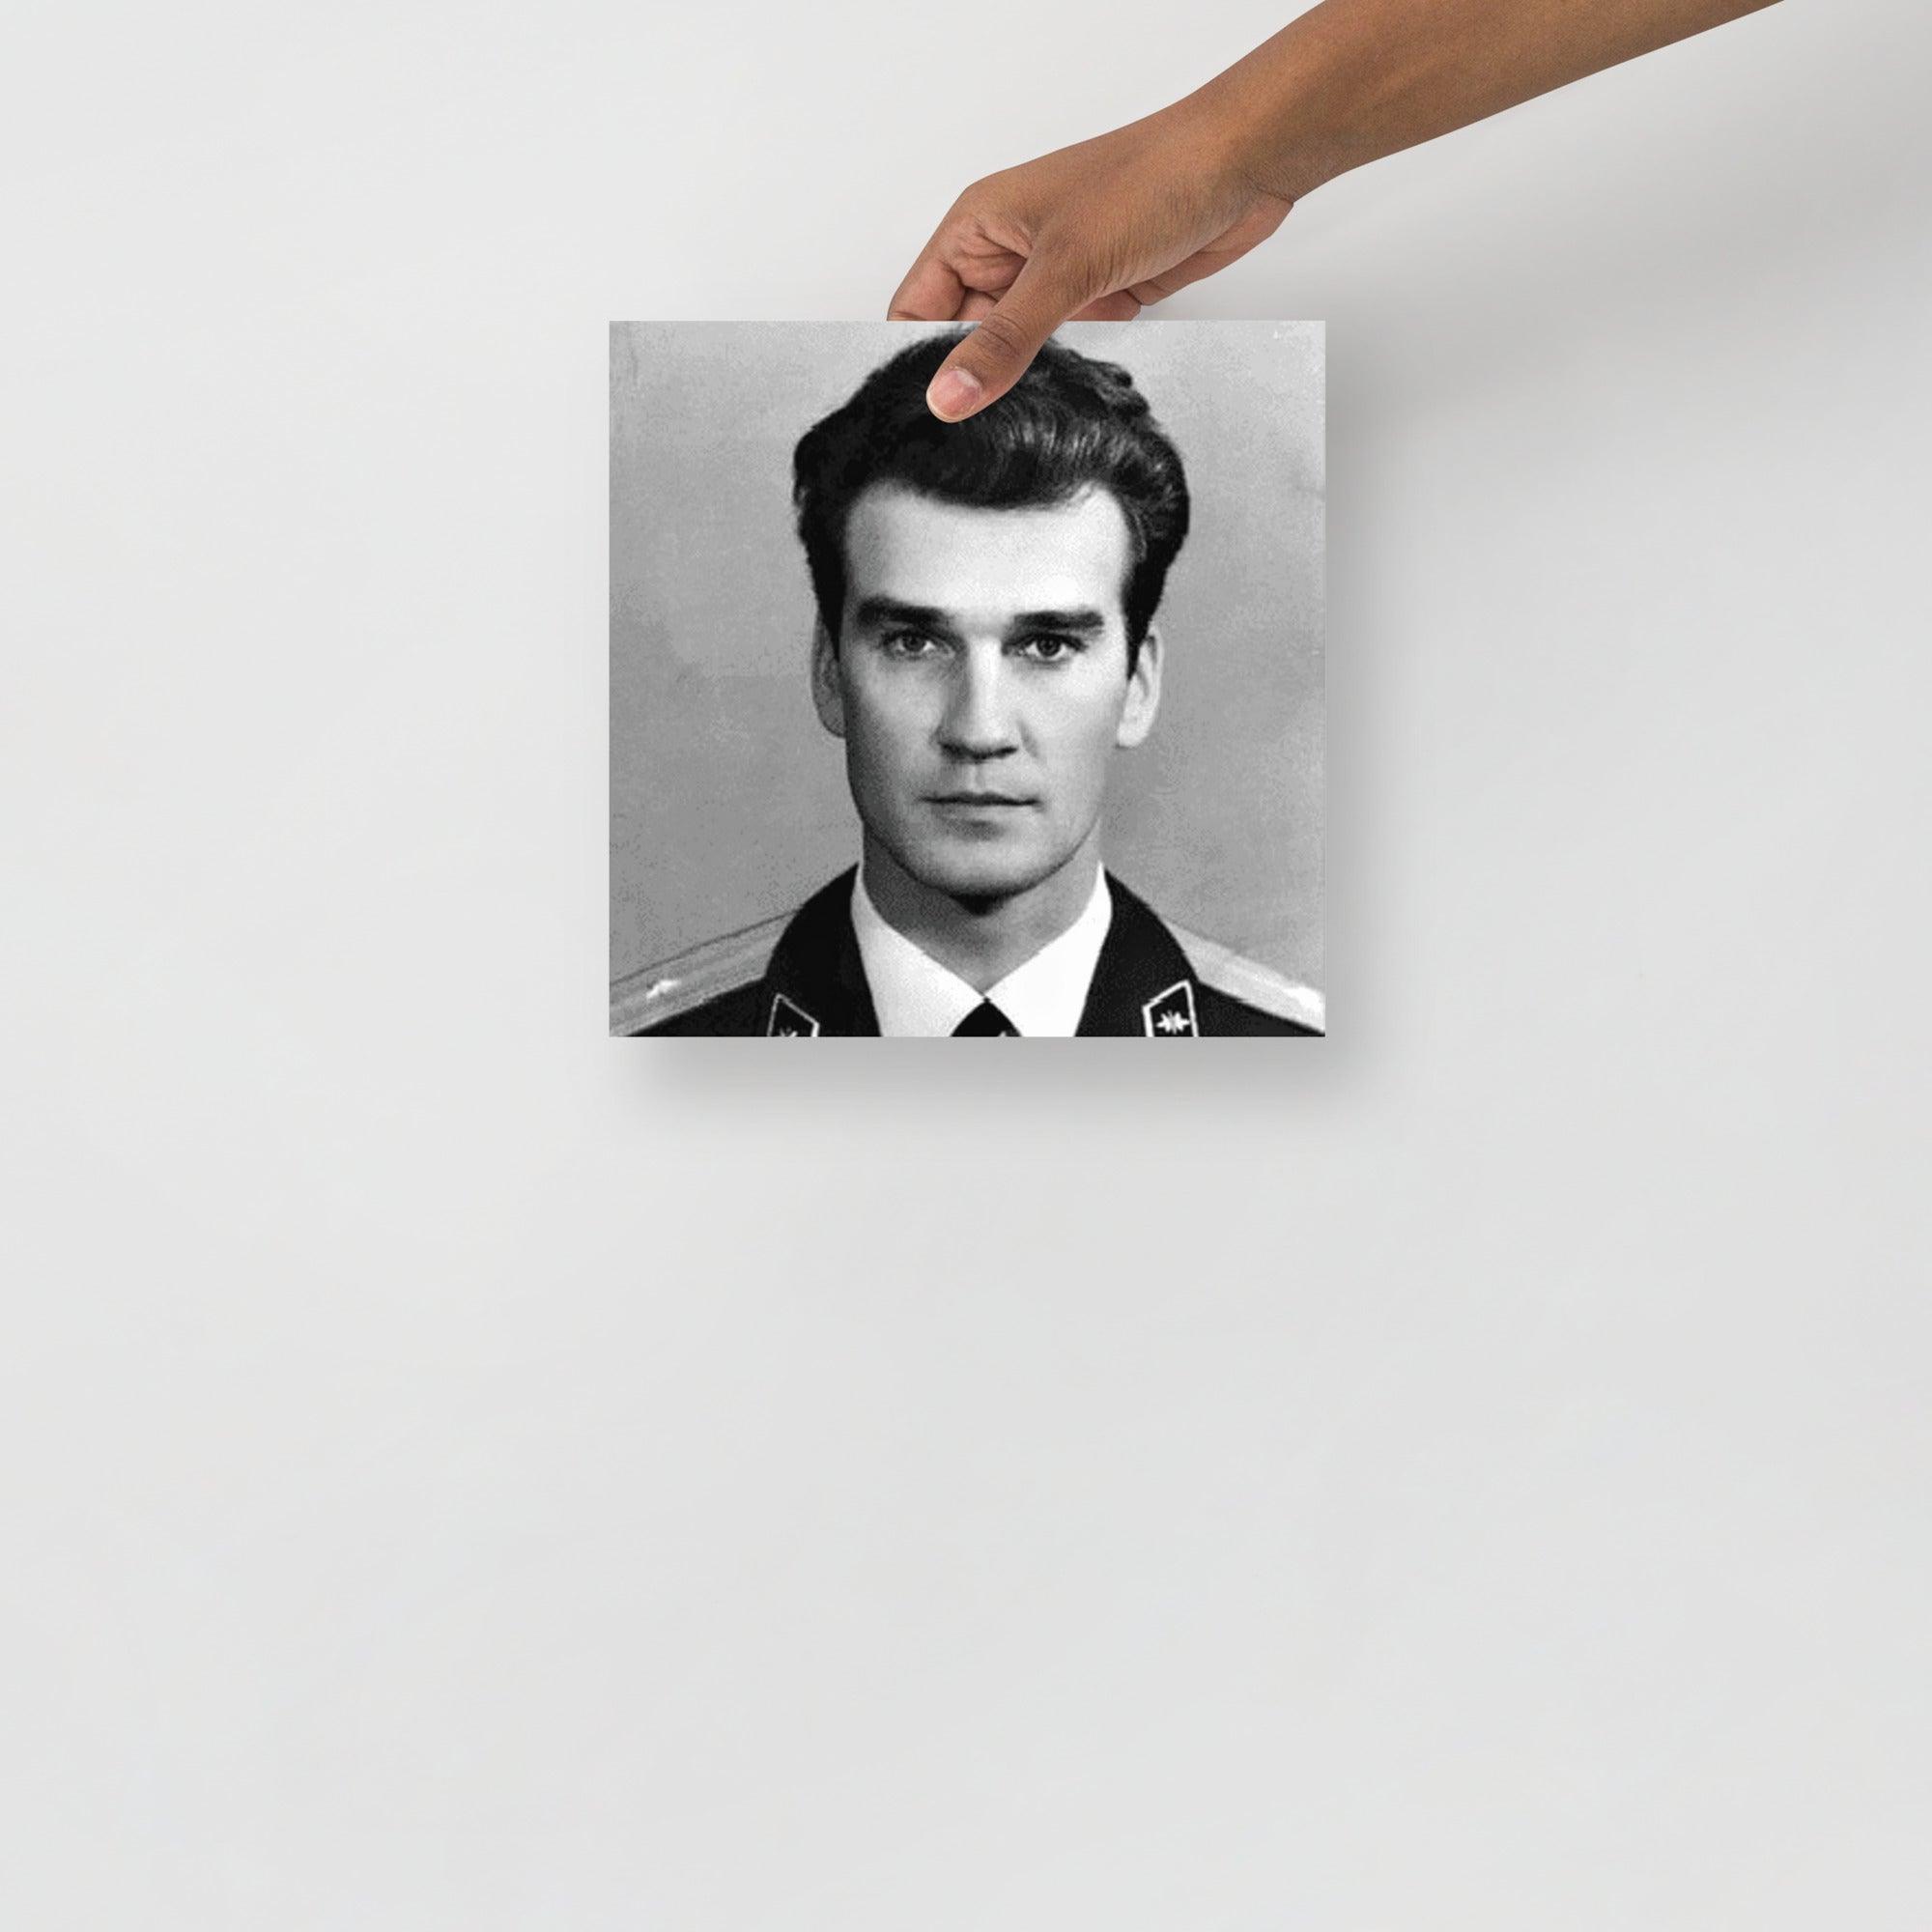 A Stanislav Petrov poster on a plain backdrop in size 10x10”.